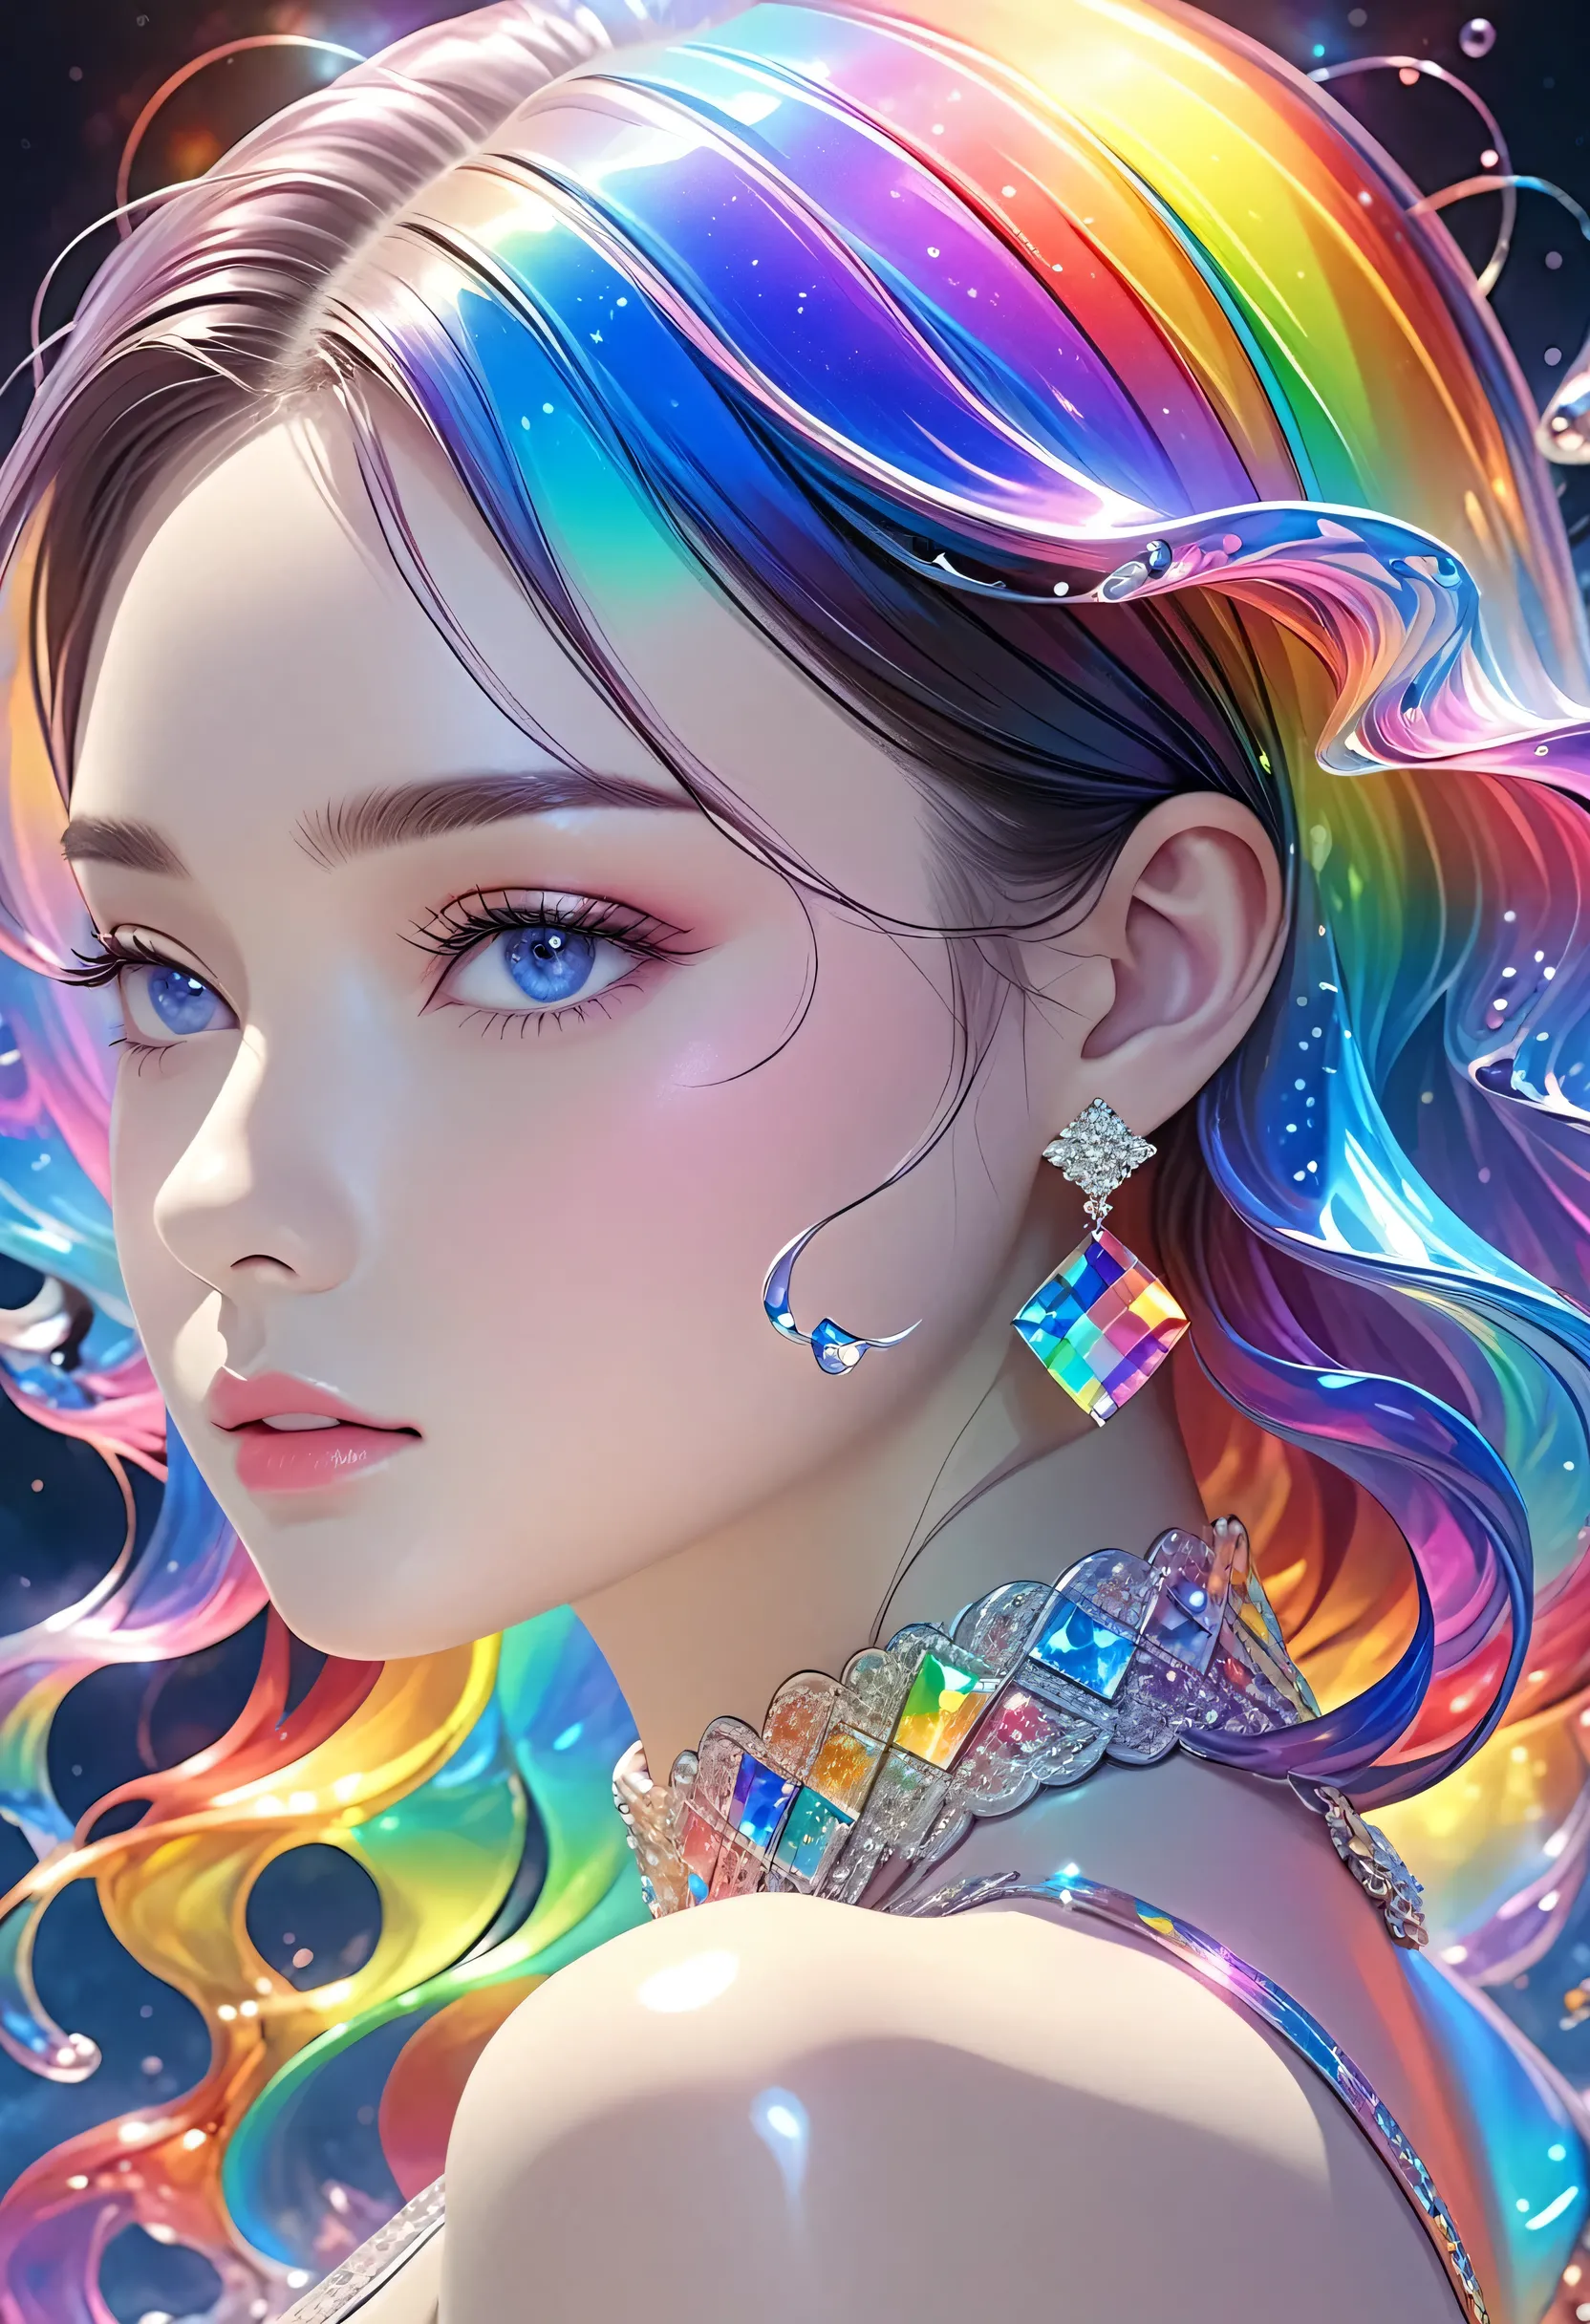 A beautiful young woman，Extremely detailed，Rich details，Jewelry，Jewelry，have， Mysterious Waves at Night. 3D. Rainbow Colors. The beauty of the melting universe. Surrealism in Nebula Reflections,32k